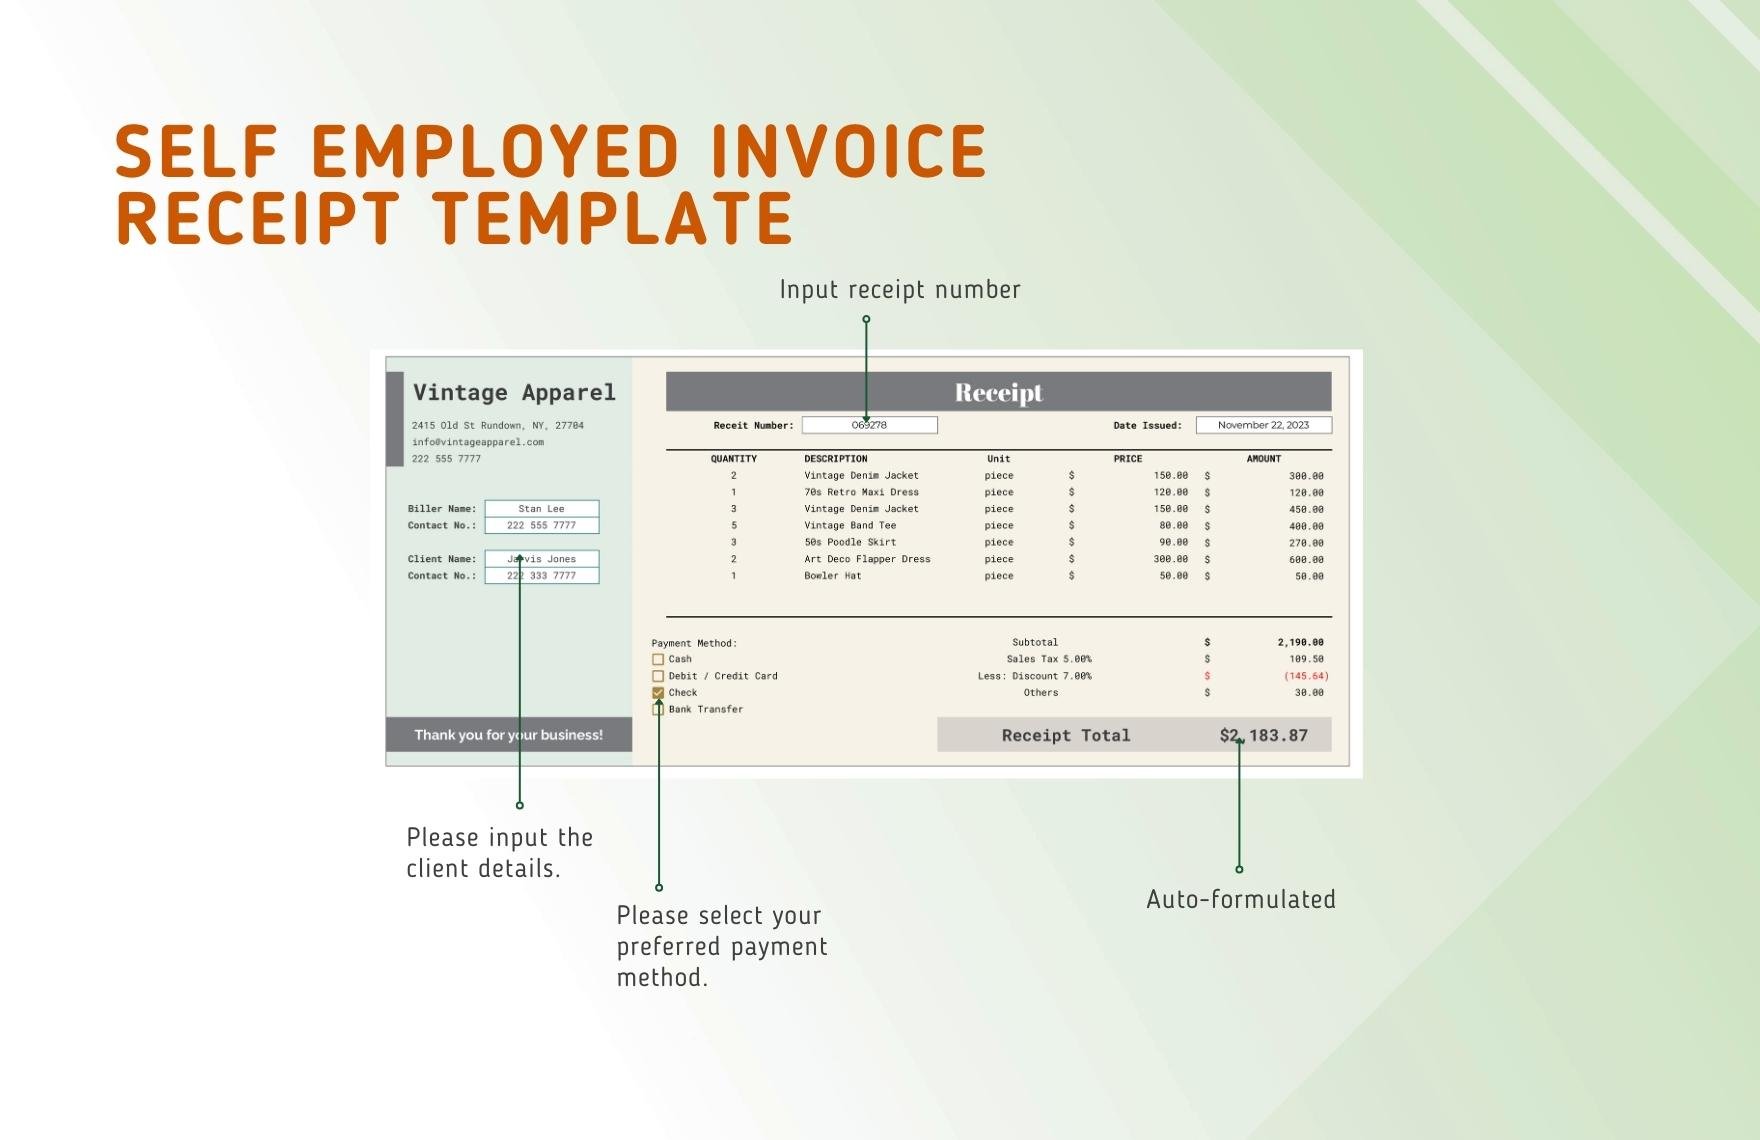 Self Employed Invoice Receipt Template